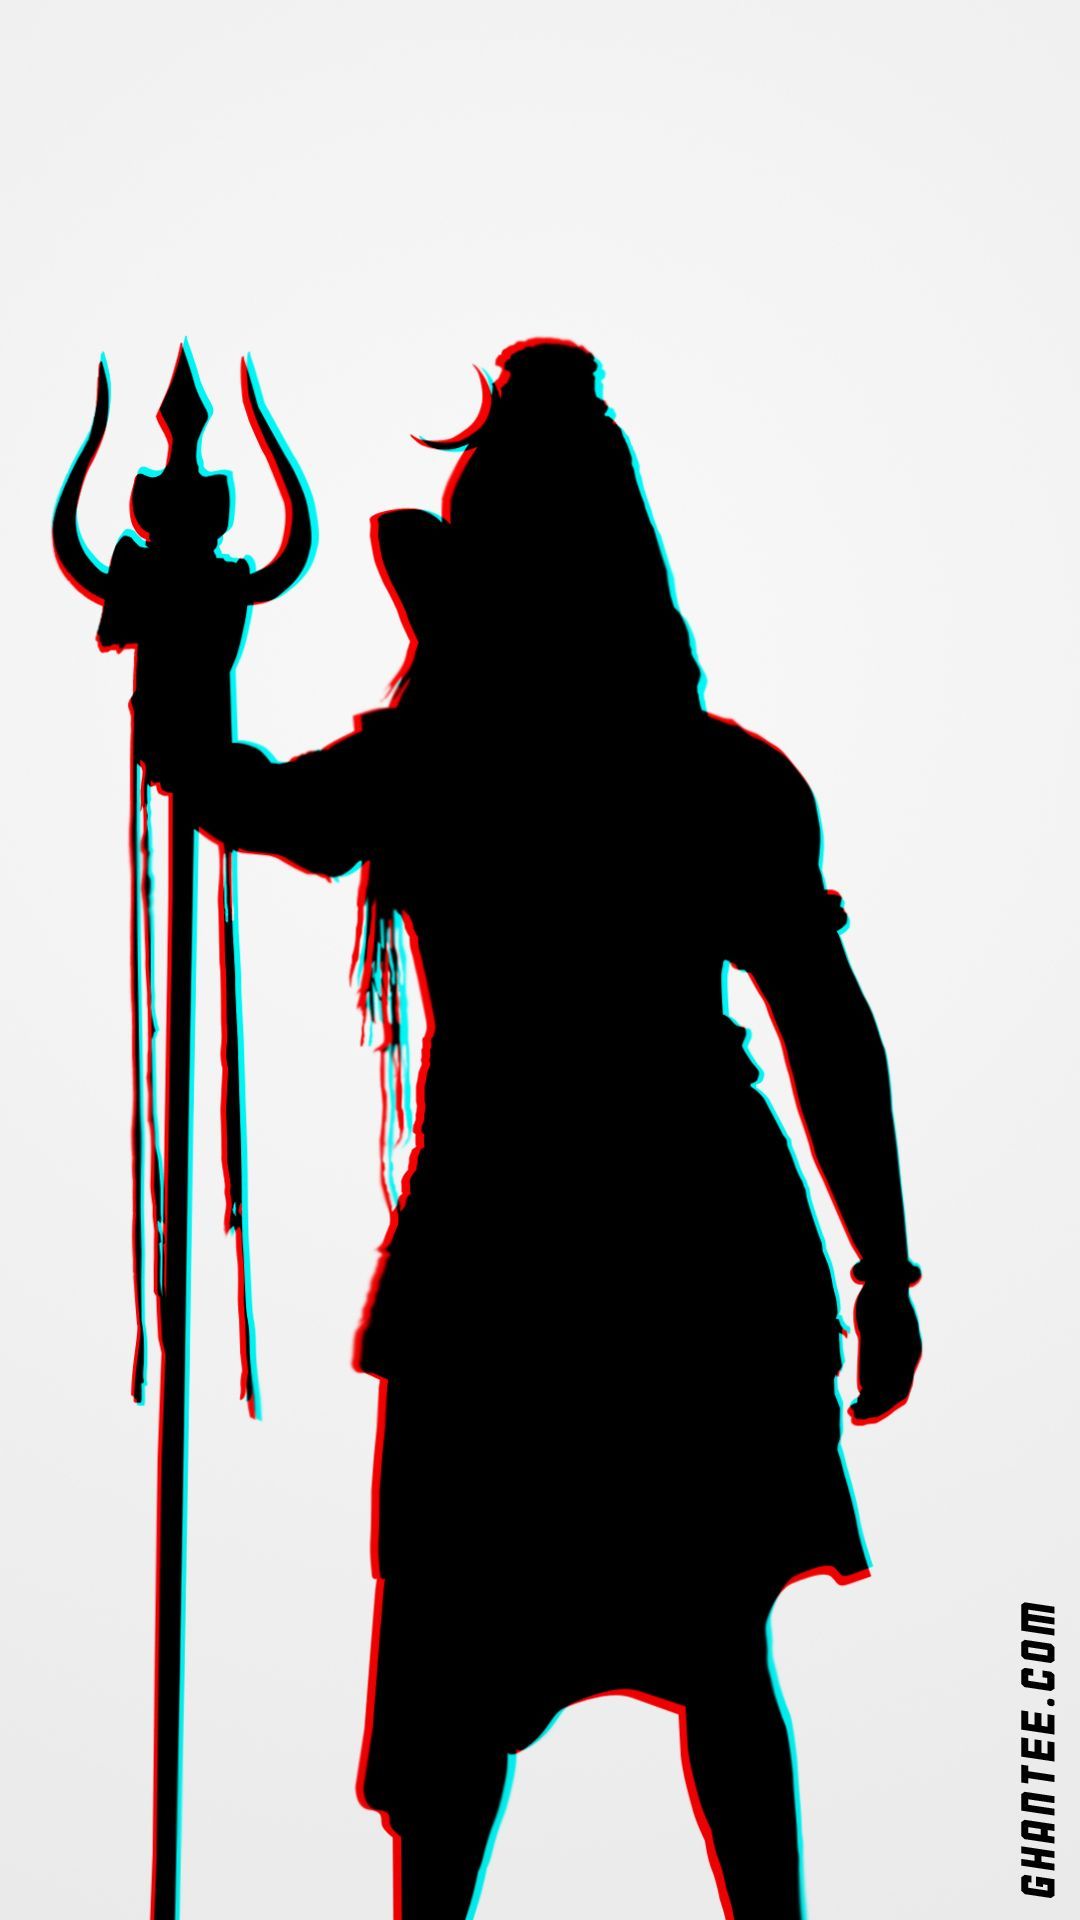 Lord Shiva 3D Wallpaper Hd Phone Background Anaglyph. Lord Shiva HD Wallpaper, Lord Ganesha Paintings, Lord Shiva Painting